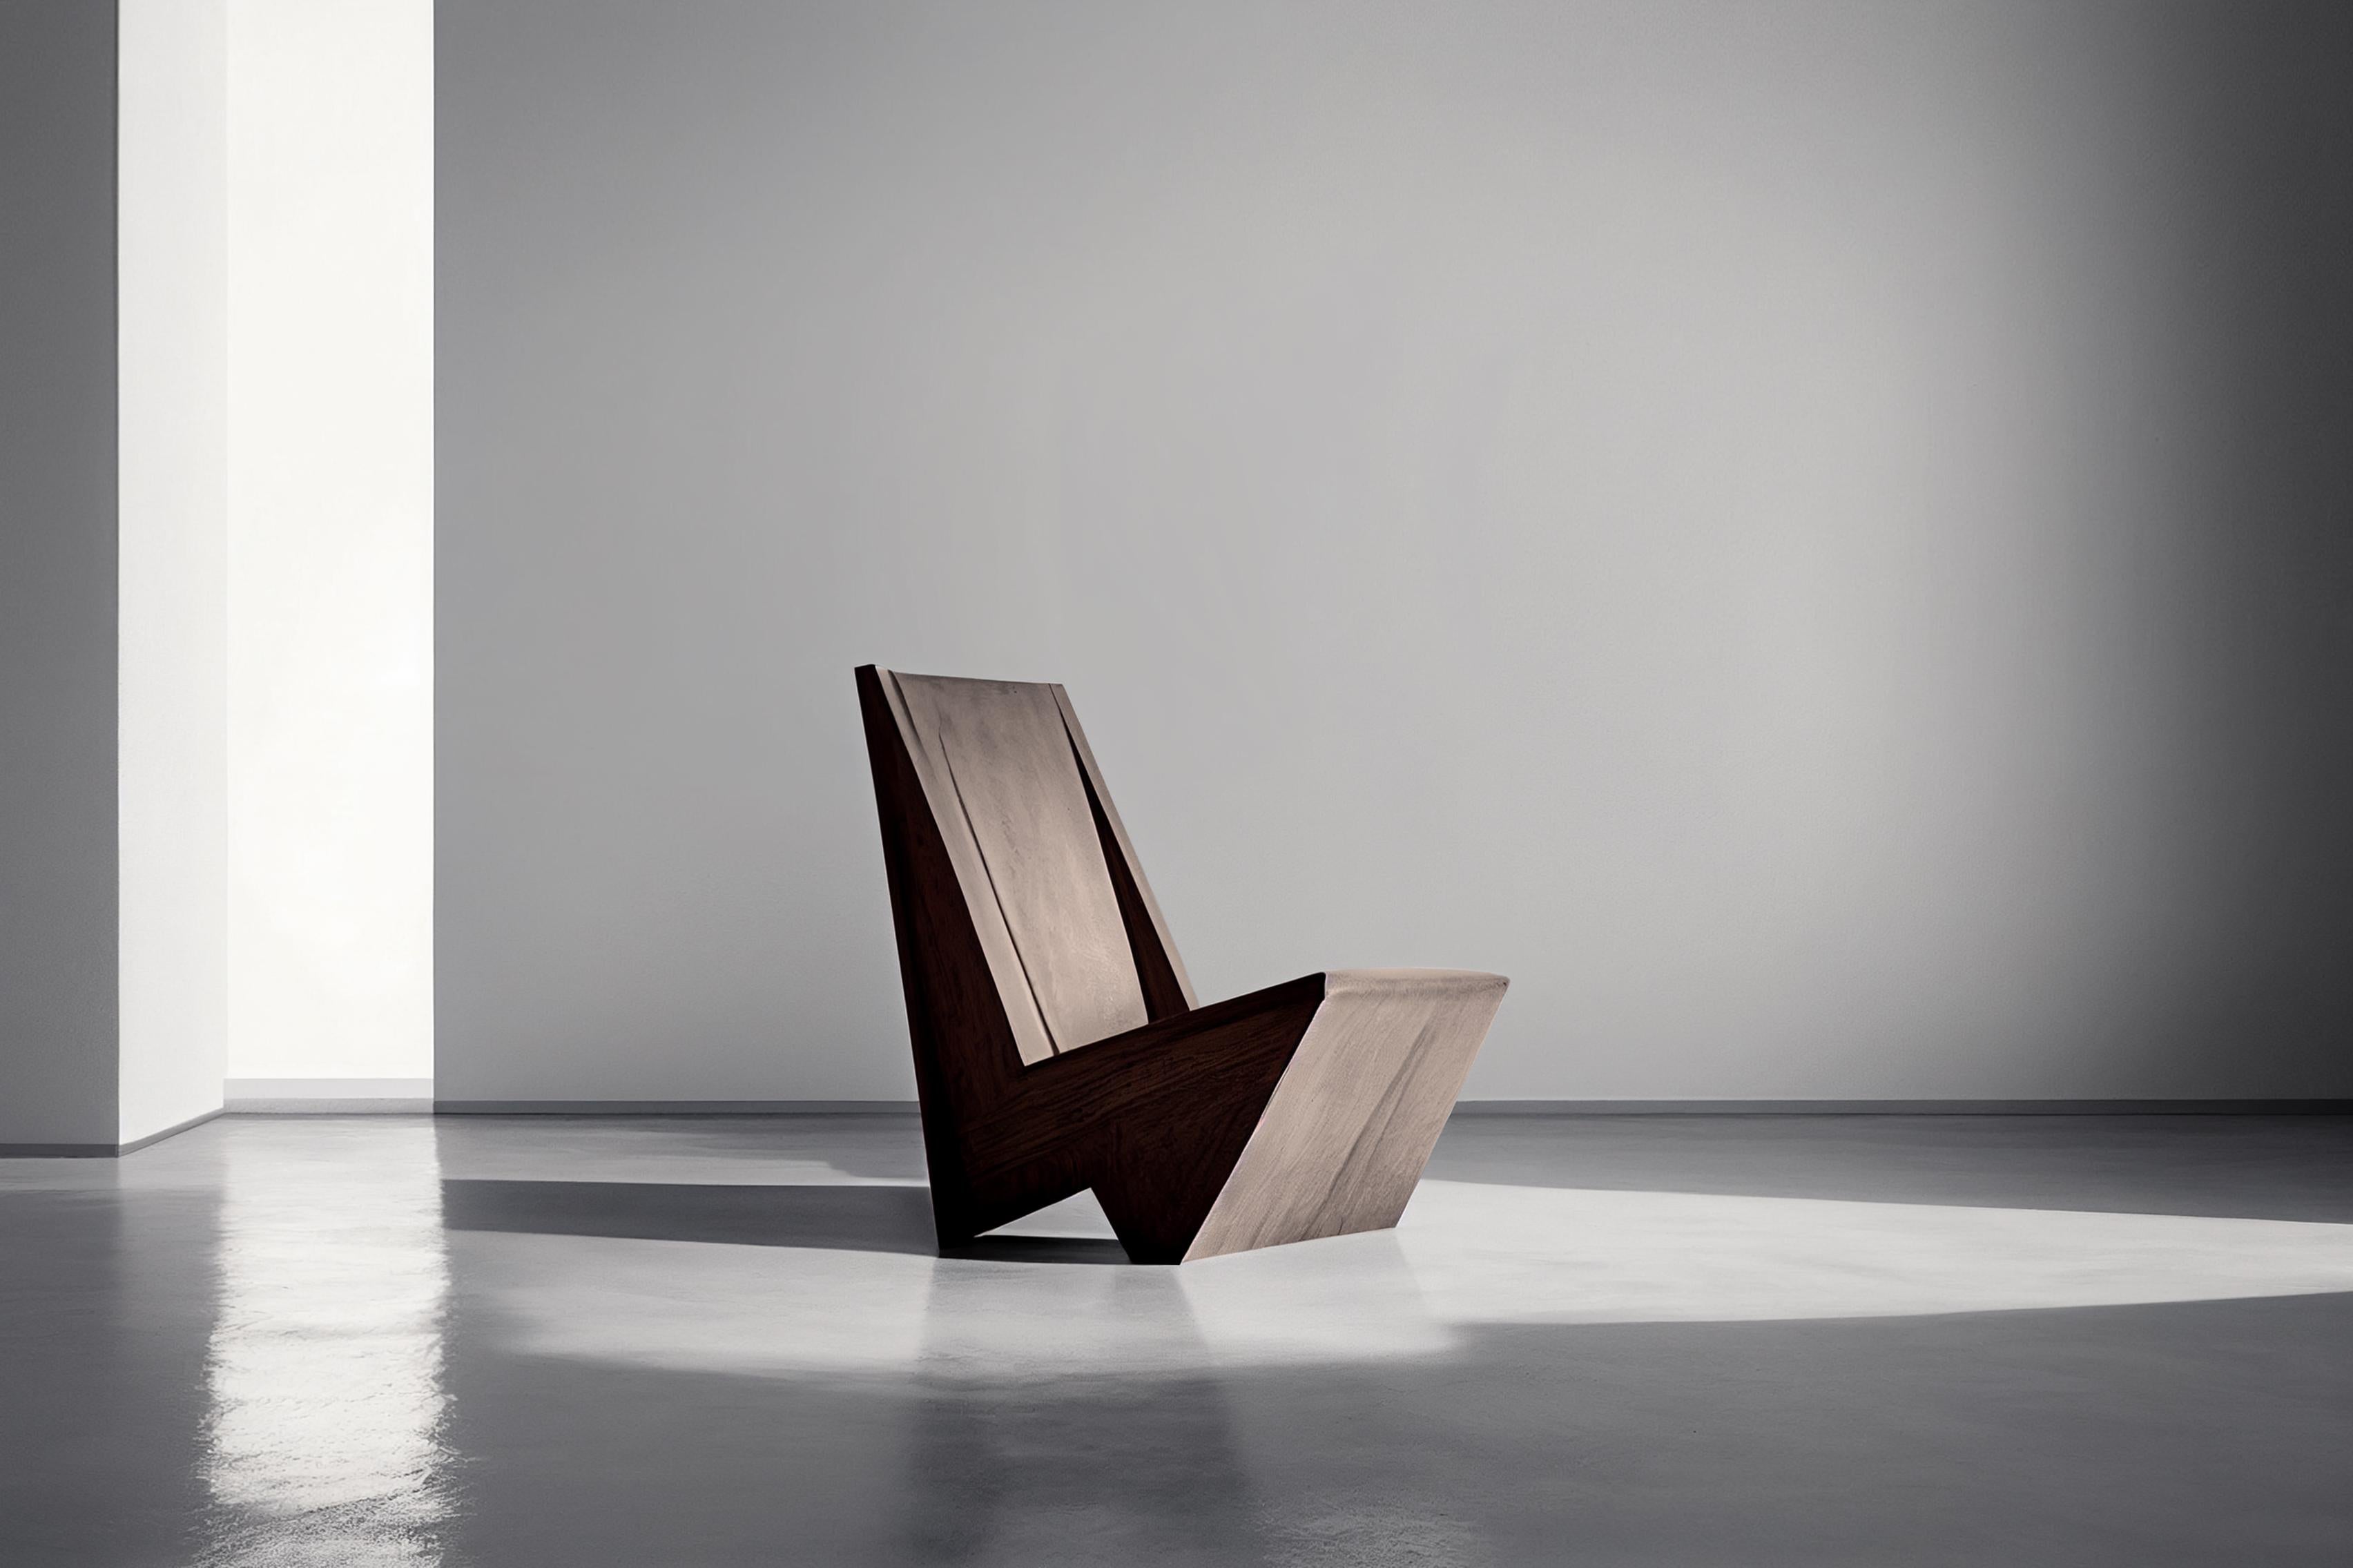 Minimalist brutalist lounge chair, burn oak wood muted easy chair by NONO.

Brutalist chairs boast a strong, yet passive presence with Minimalist designs that highlight the rich textures of natural oak wood. The goal was to showcase the beauty and